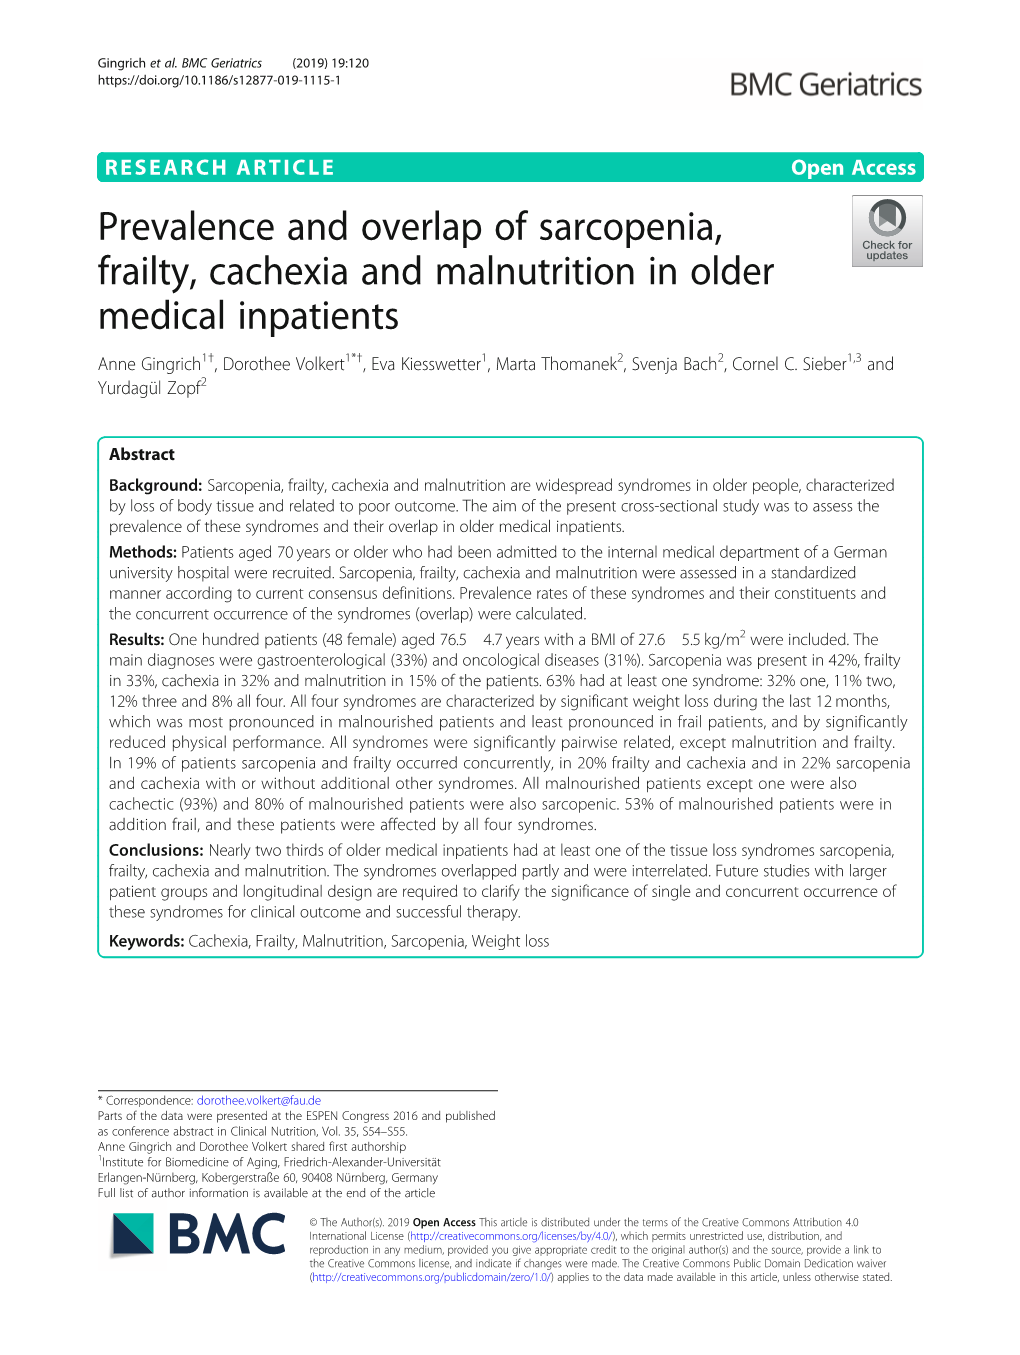 Prevalence and Overlap of Sarcopenia, Frailty, Cachexia and Malnutrition In